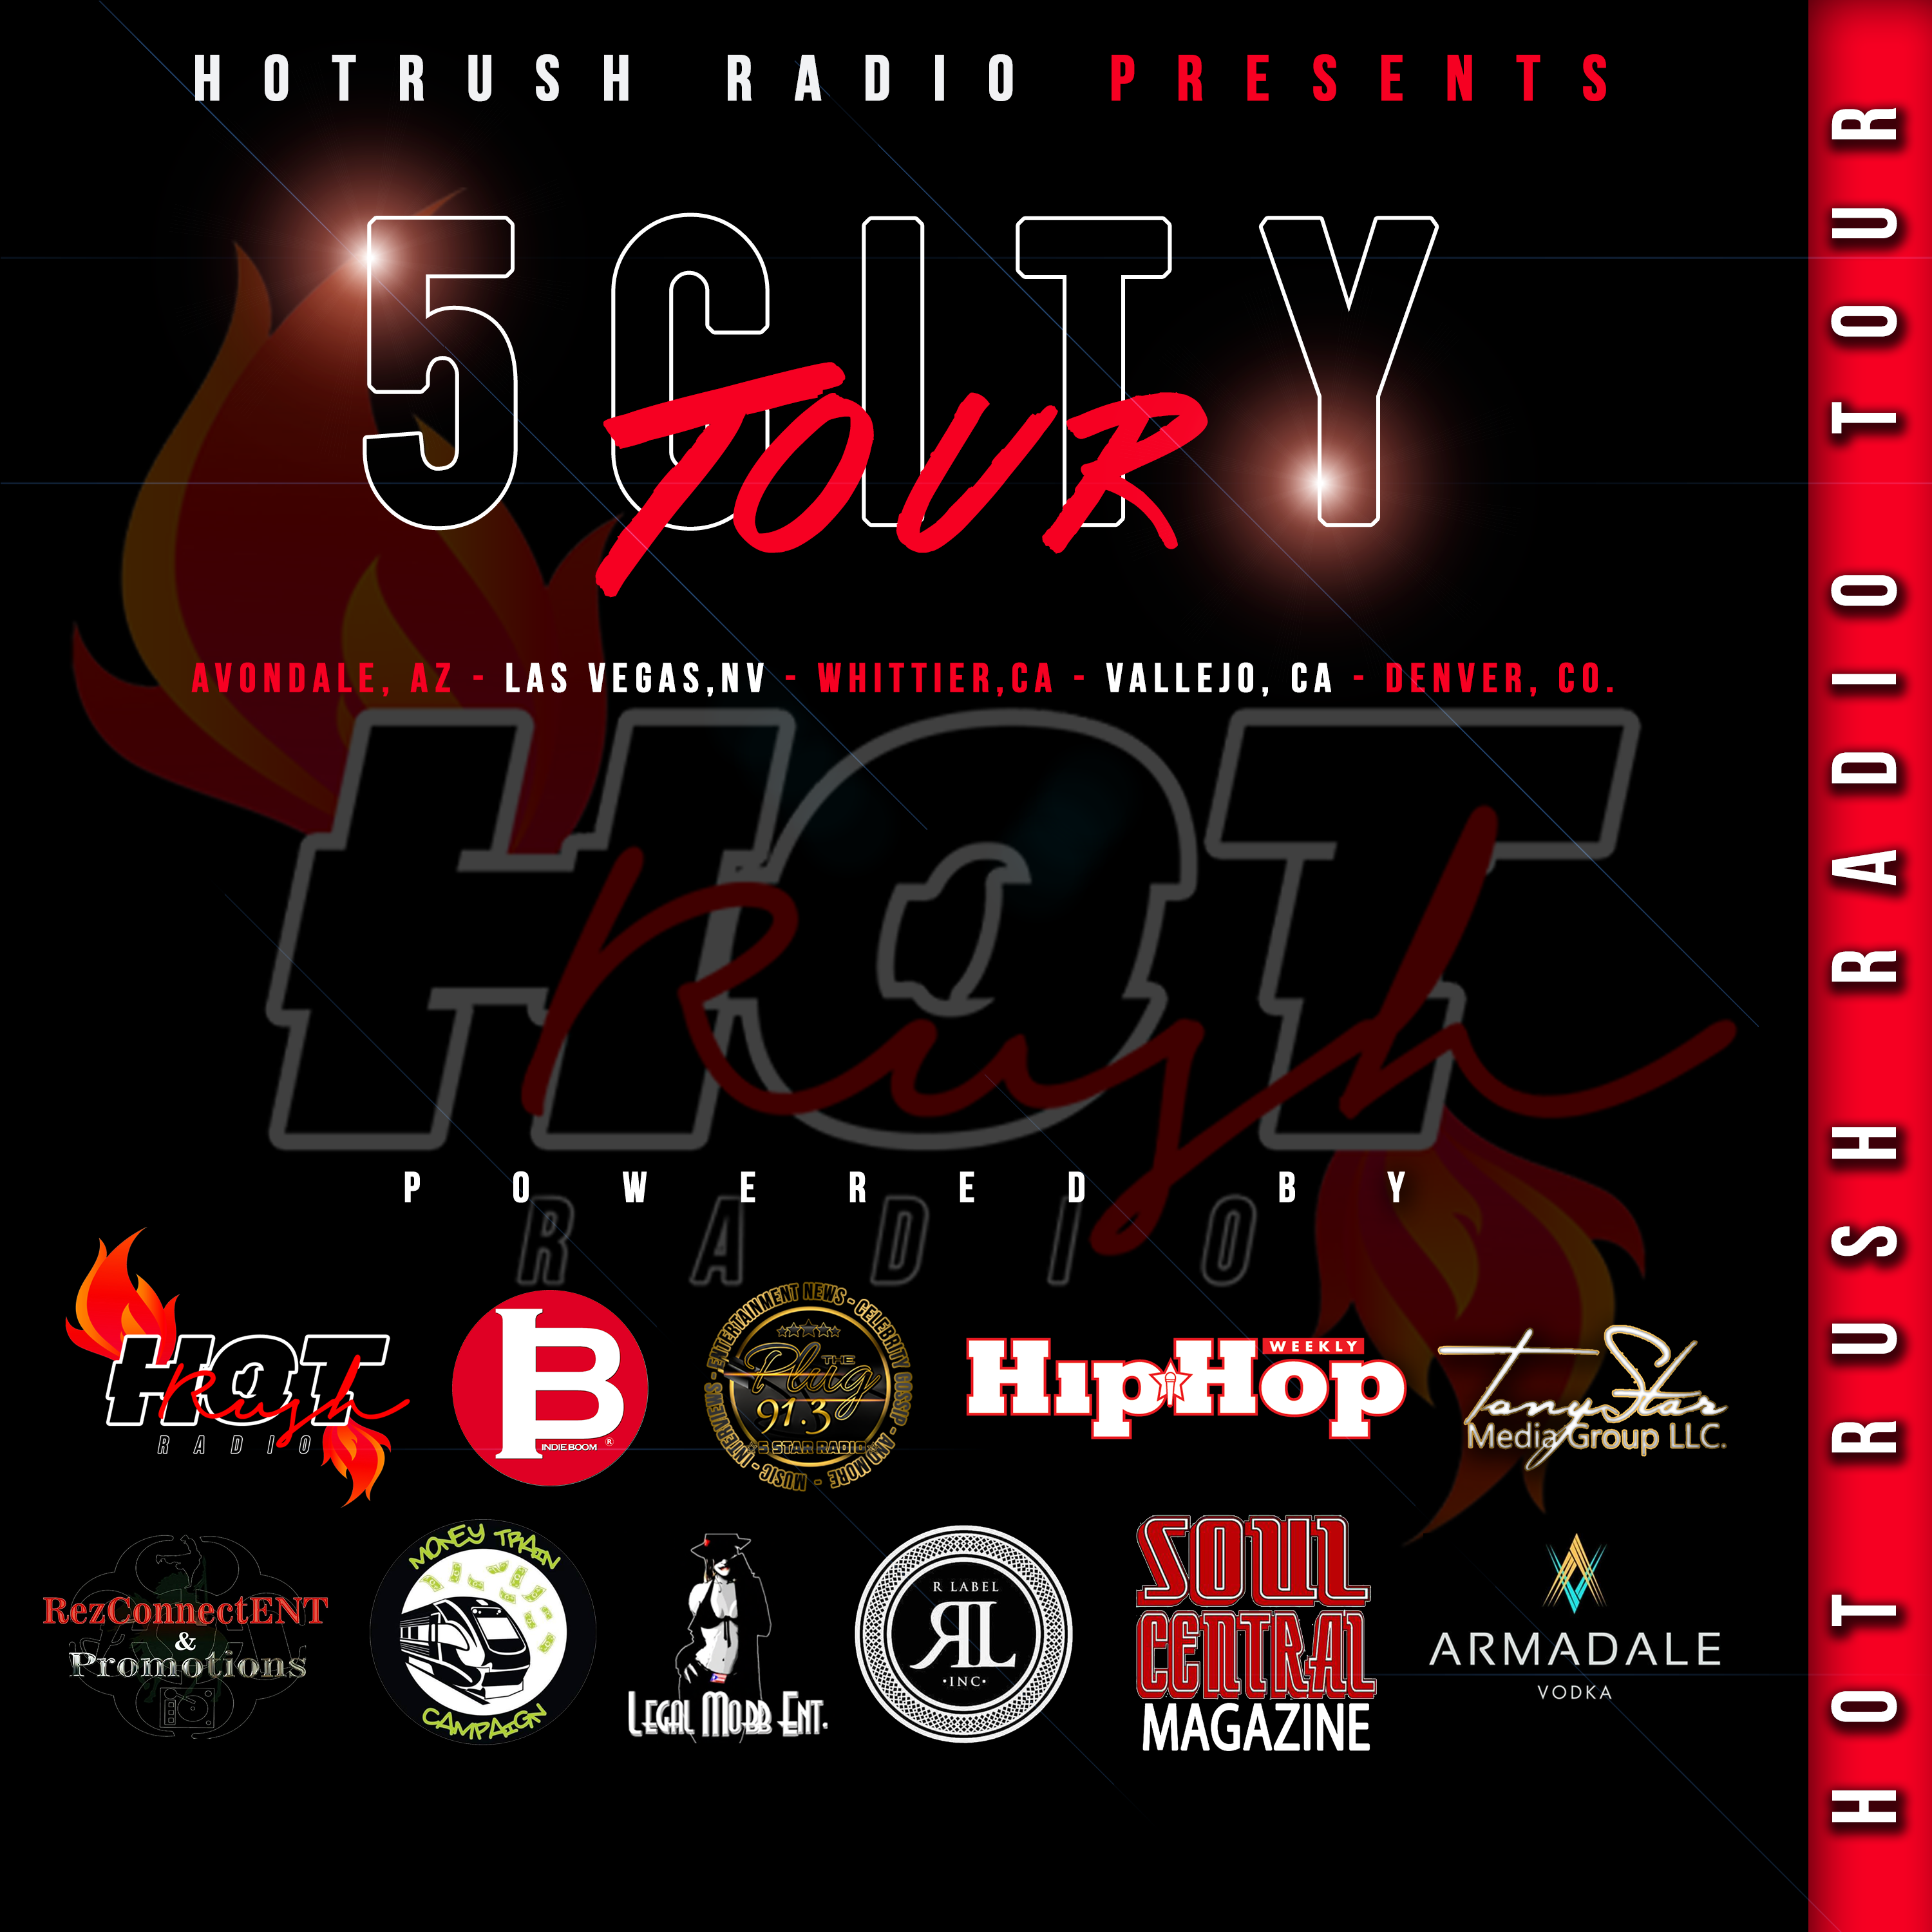 5 CITY TOUR Brought to you by Hot Rush Radio